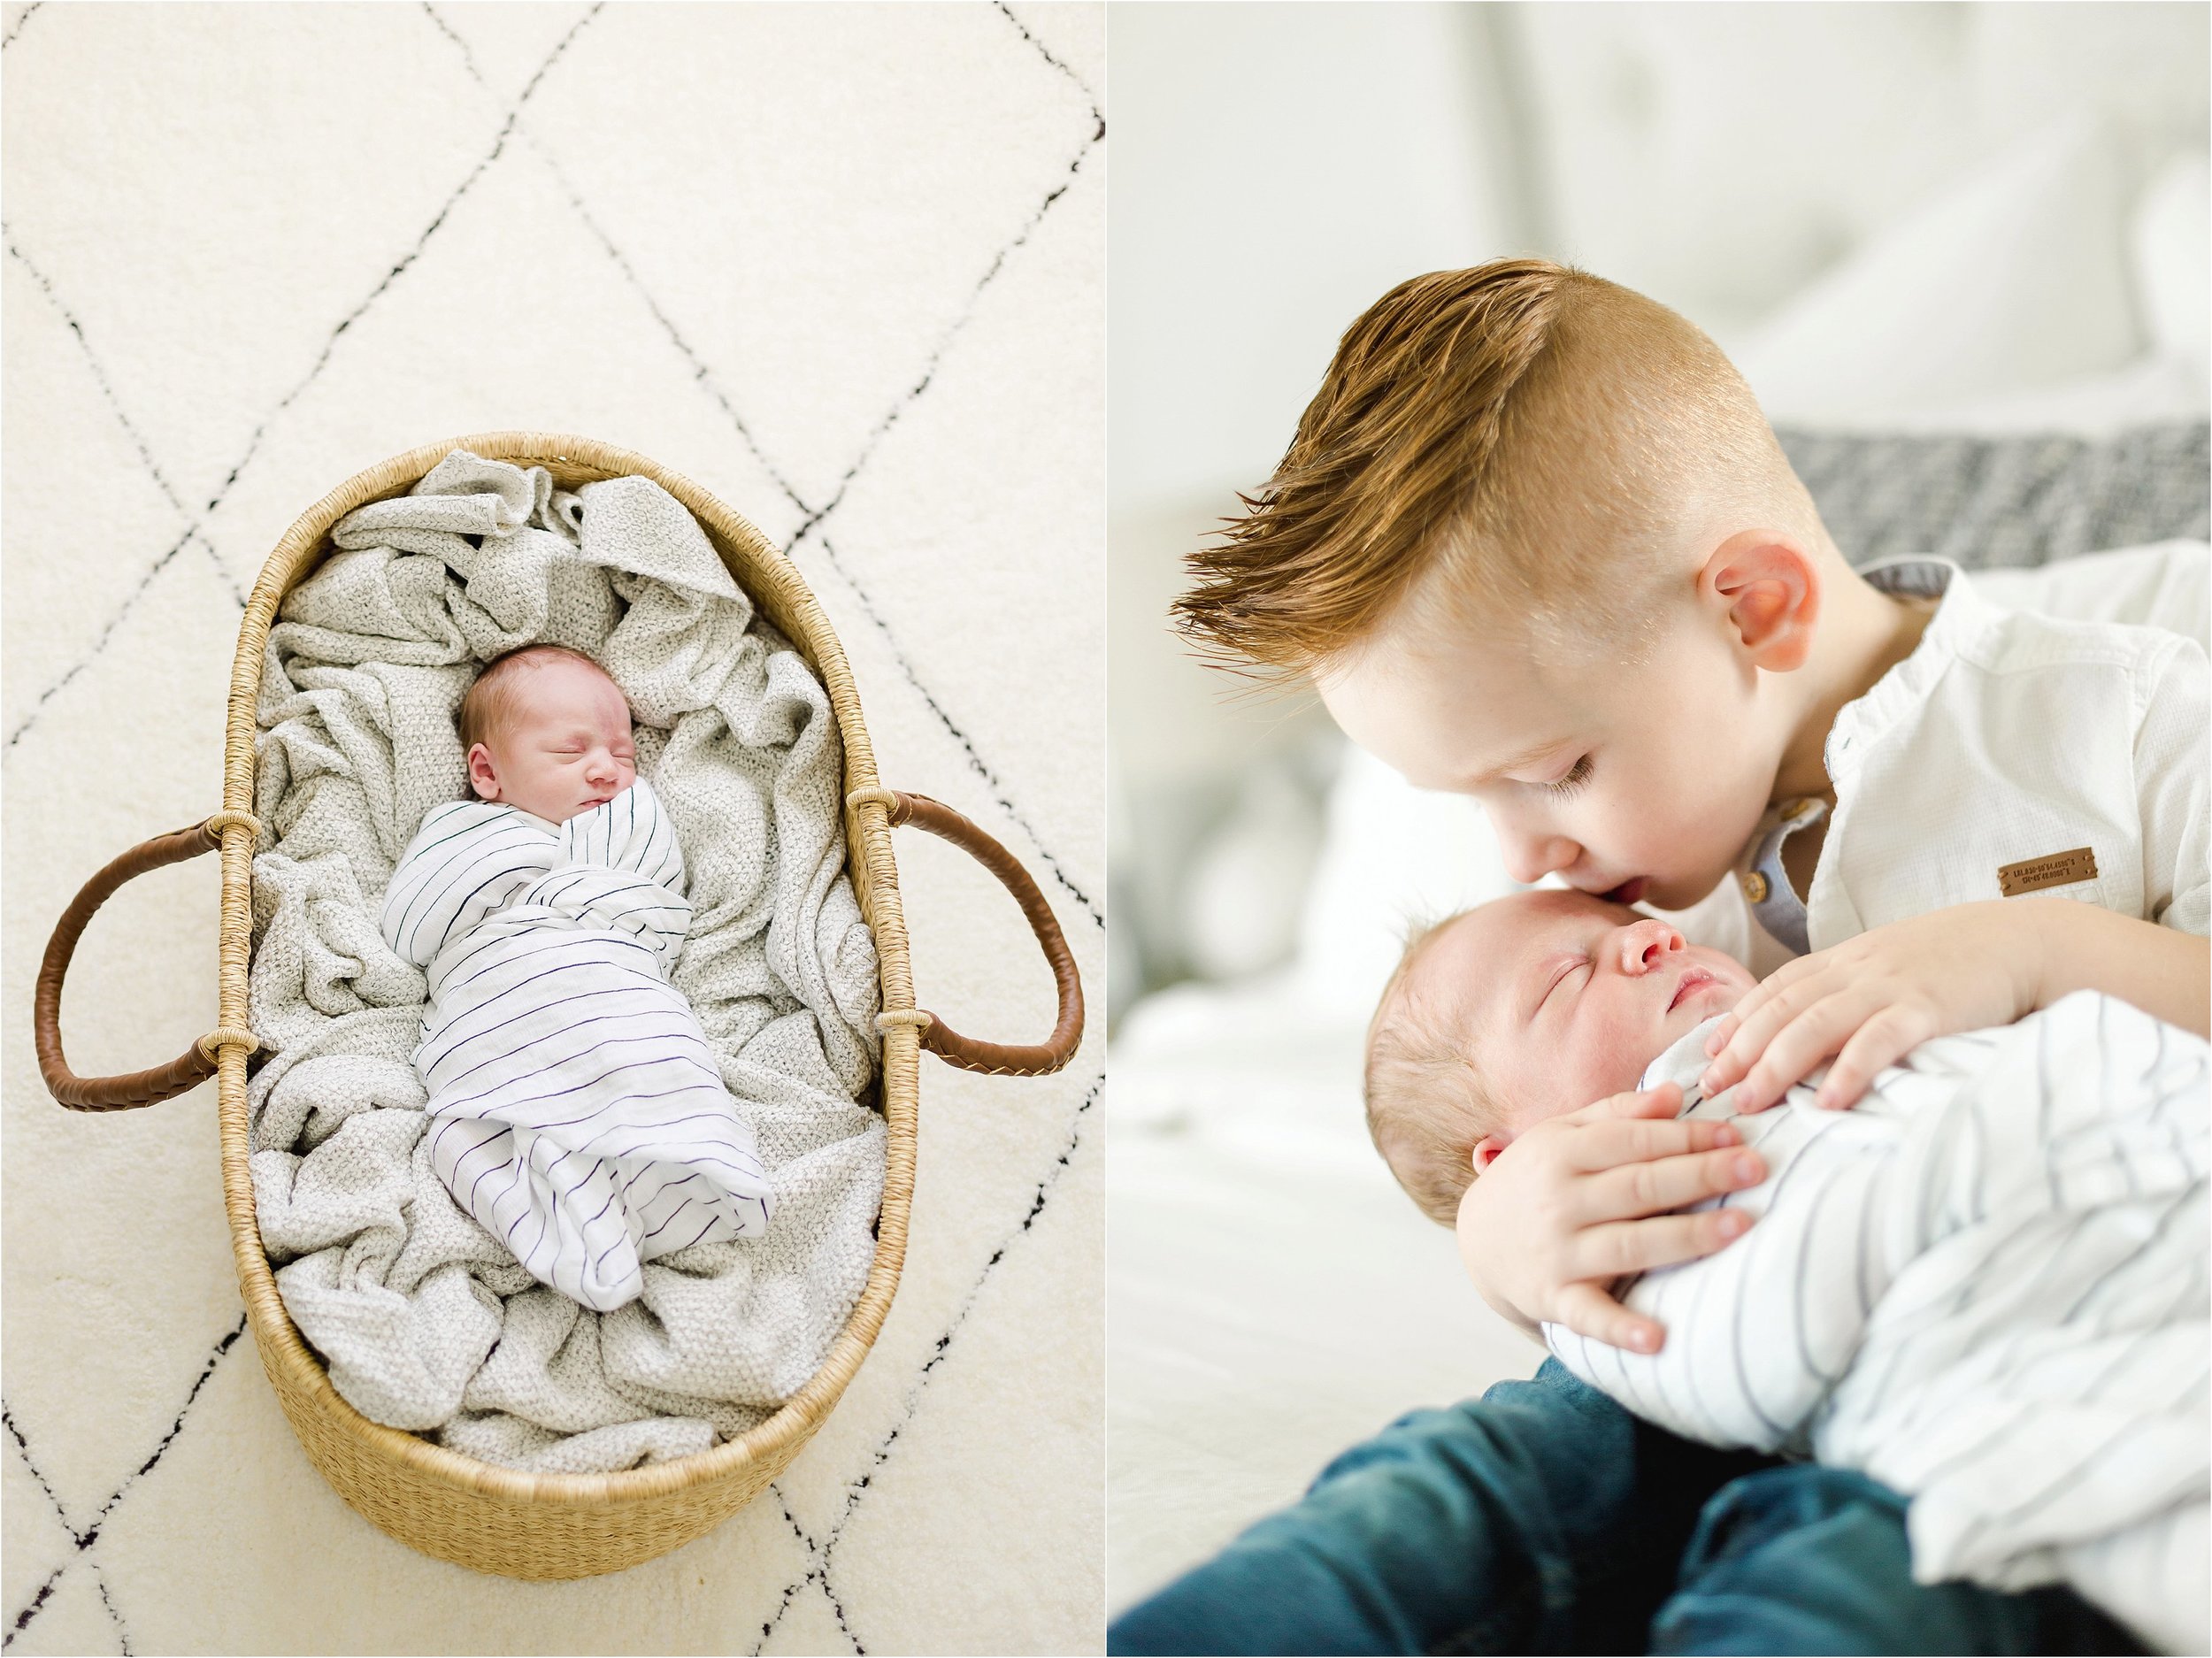 Image on the left shows baby boy in a black and white swaddle, lying on a blanket in a basket.  Image on the right shows red-headed older brother holding his baby brother while giving him a kiss on the forehead. 